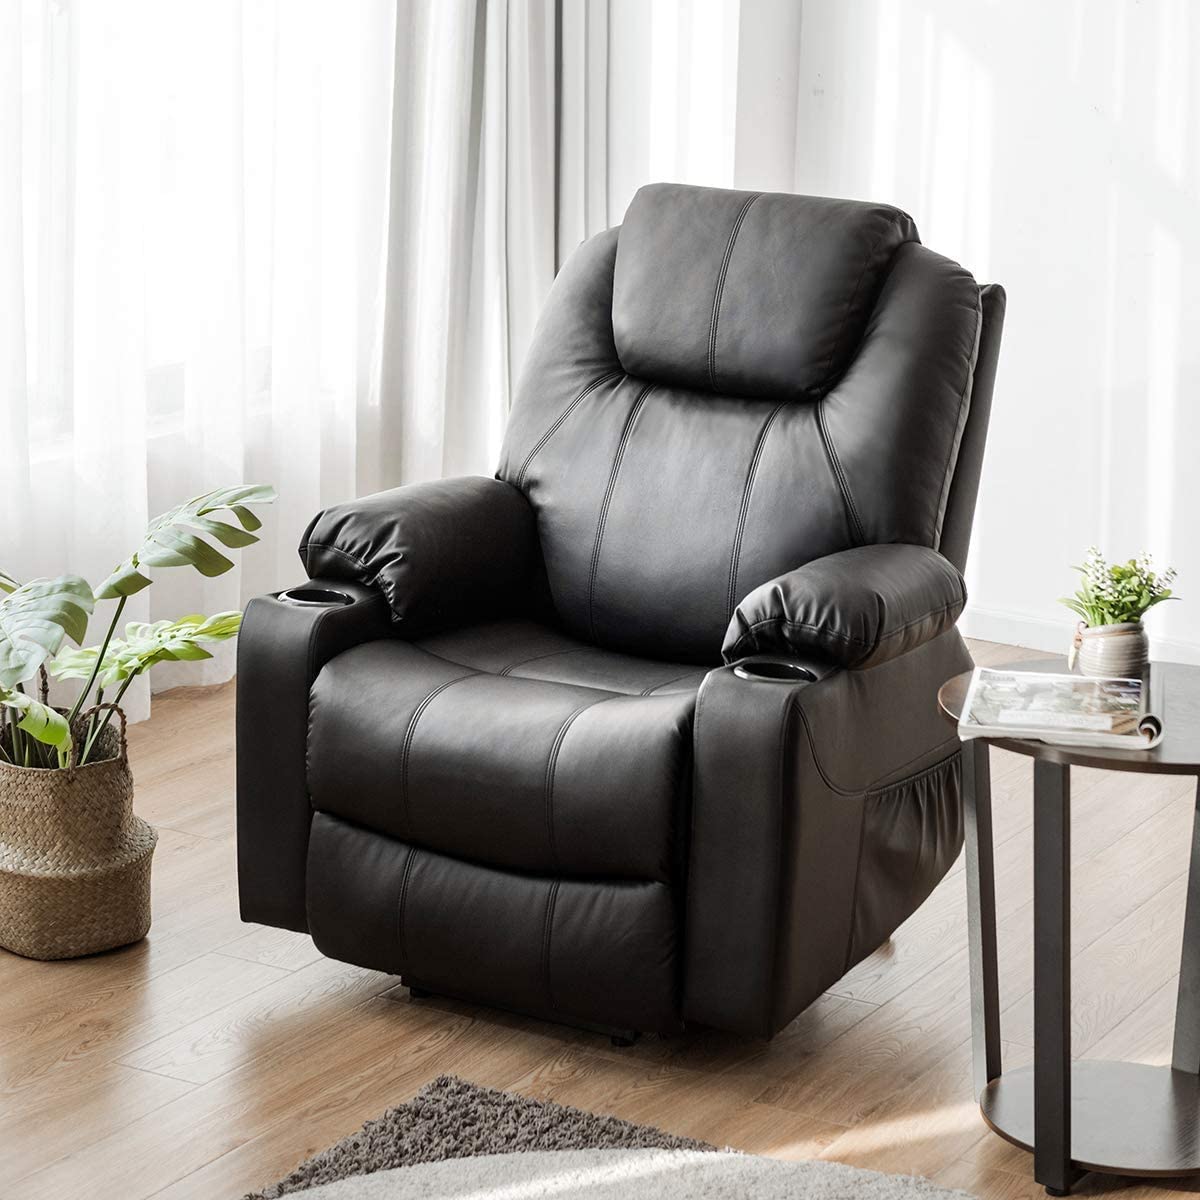 Giantex Recliner Chair, Manual Reclining Chair w/Big Armrests, Overstuffed  Cushions, Single Lazy Sofa Lounger Home Theater Recliner for Living Room